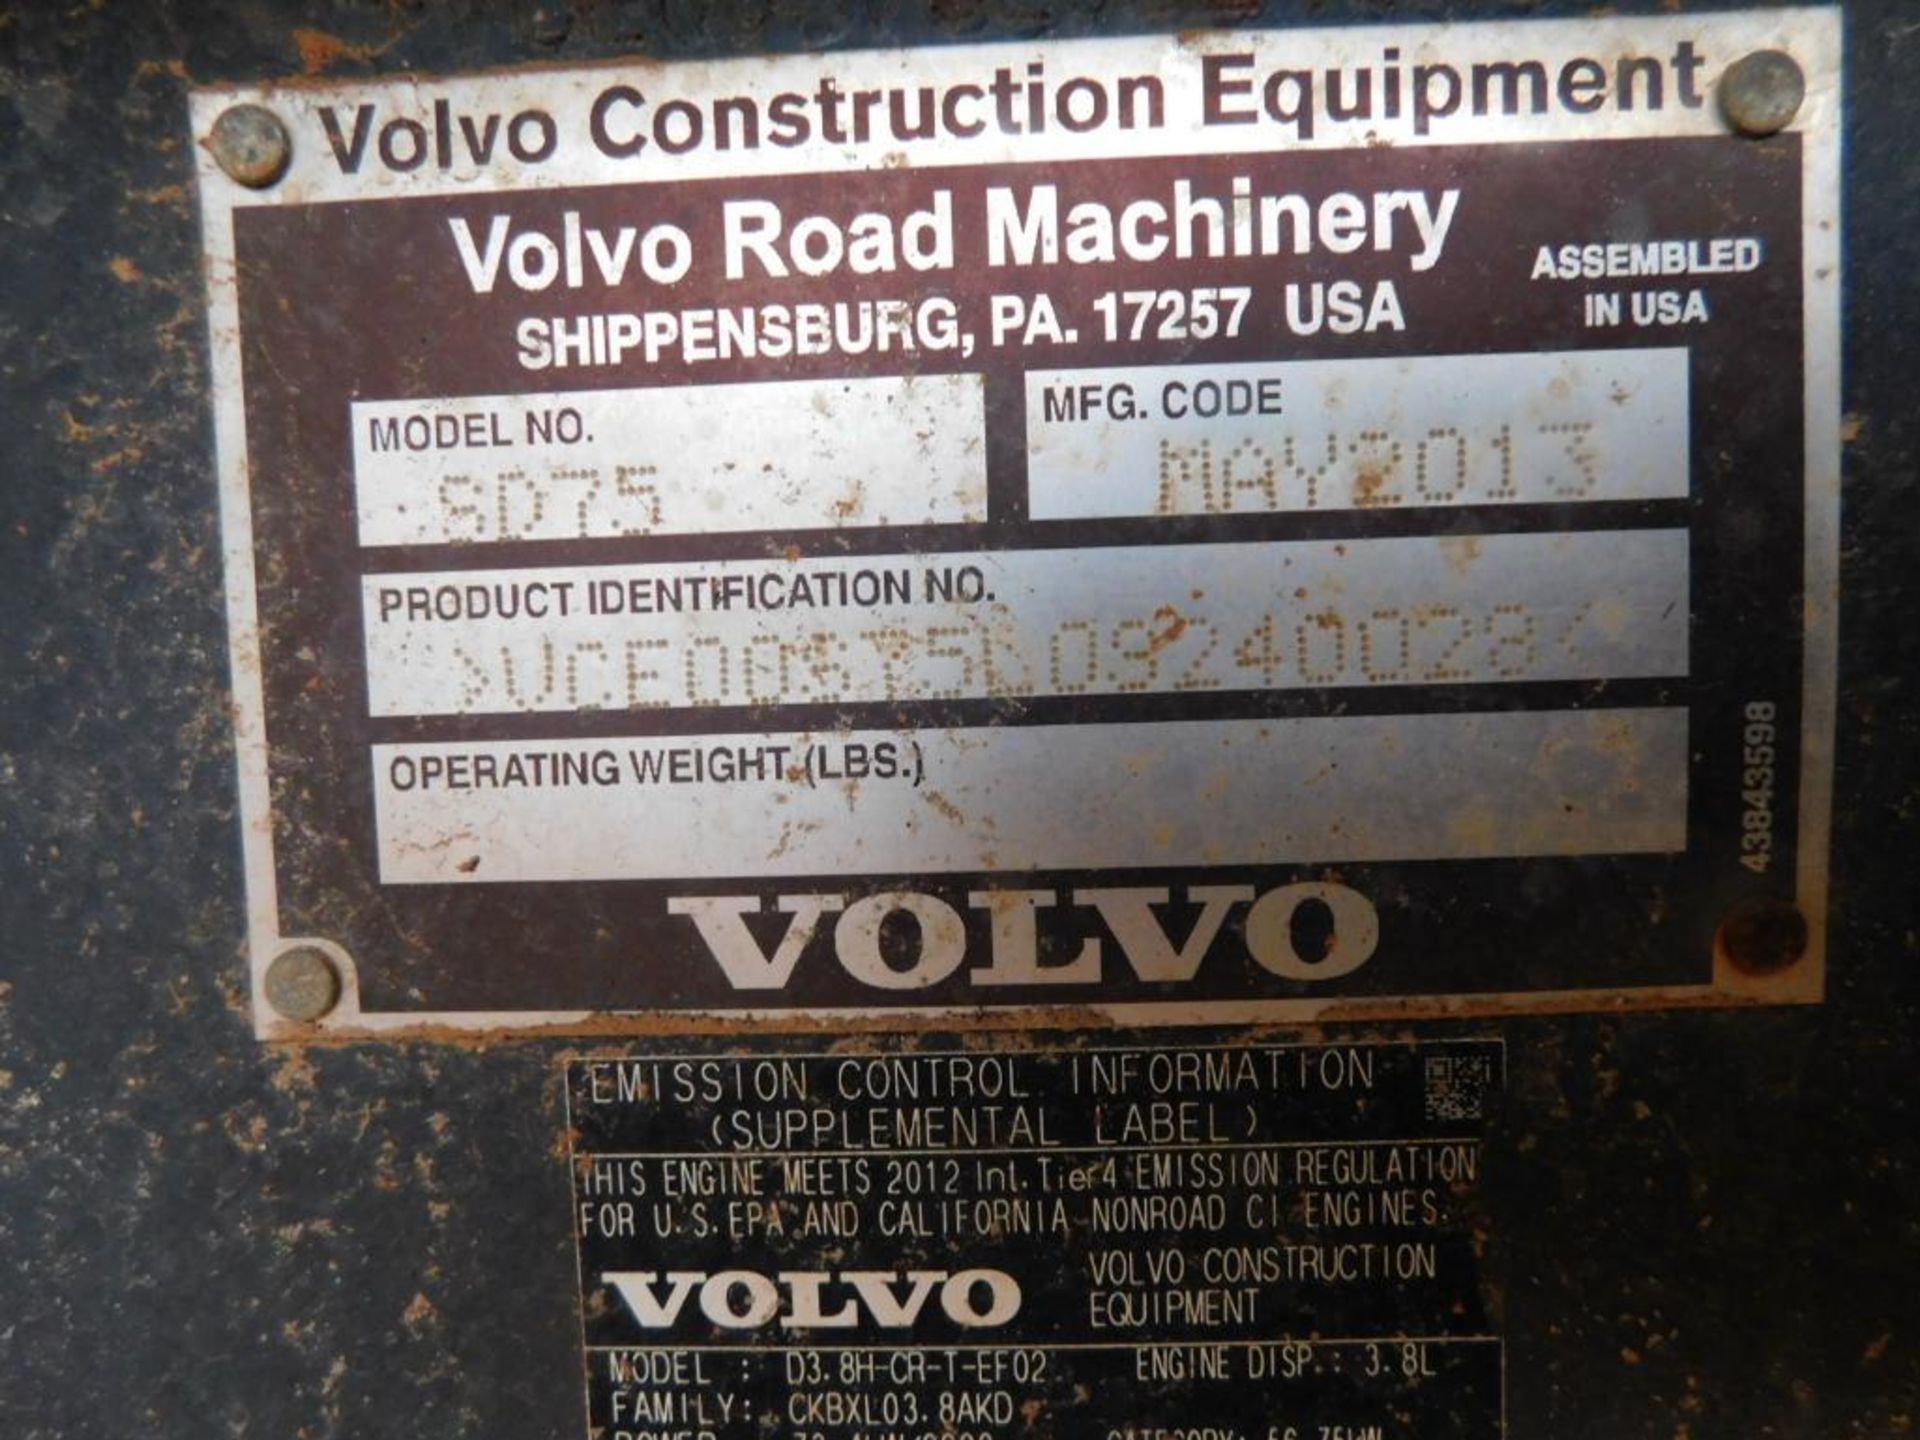 2014 Volvo SD75 Rubber Tire Roller, S/N 240028, C01 - Image 9 of 9